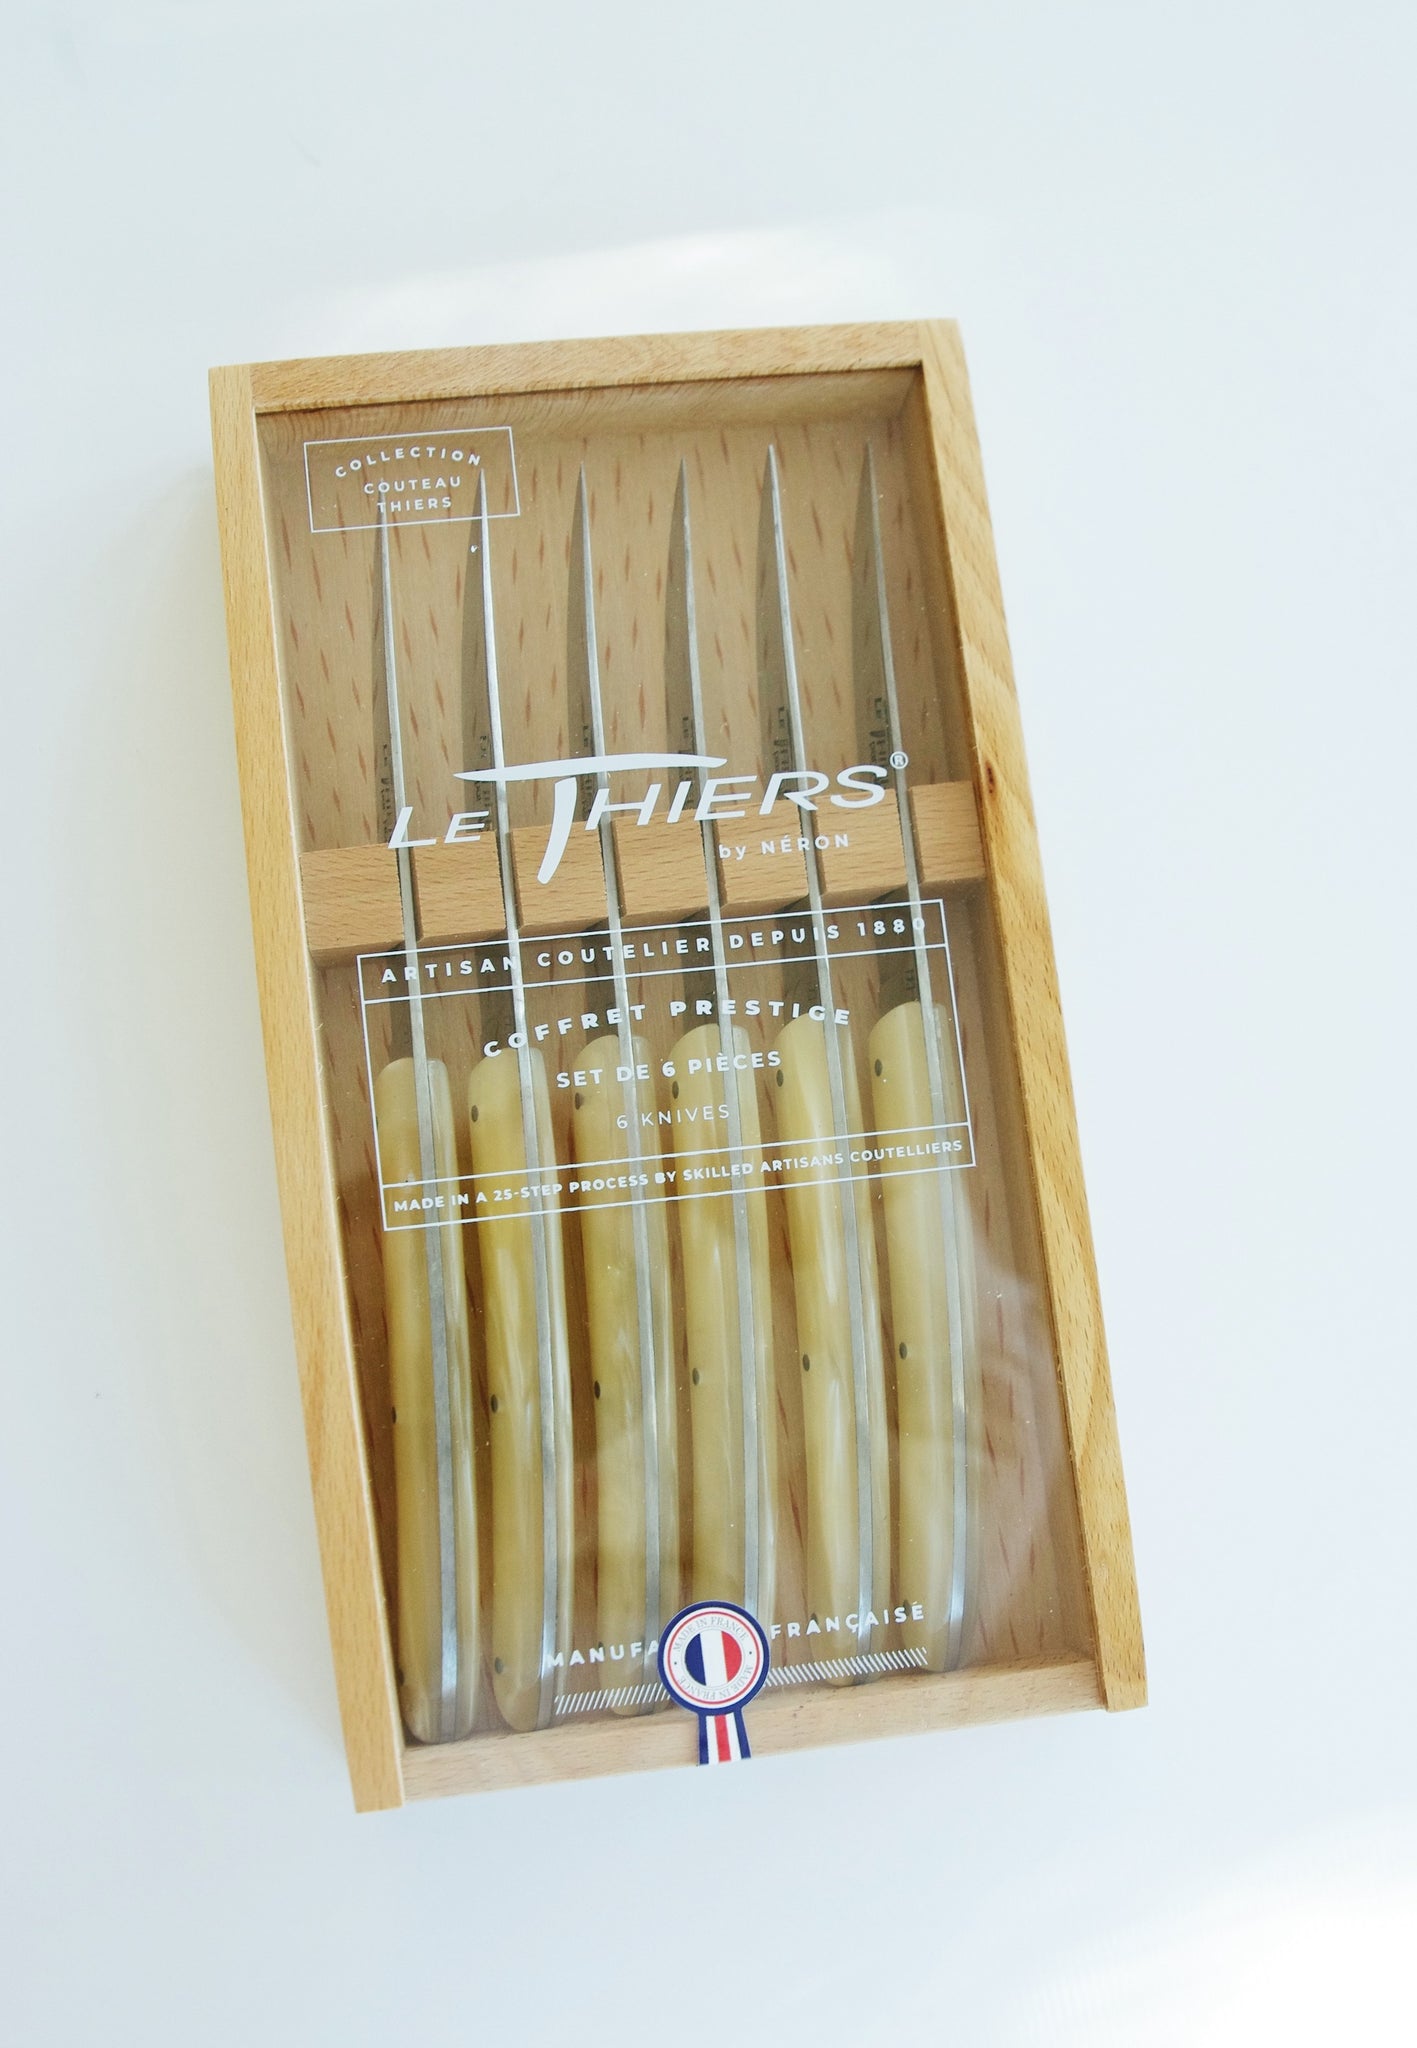 Box of six knives with pearlescent handles. Red white and blue sticker reads Made in France.